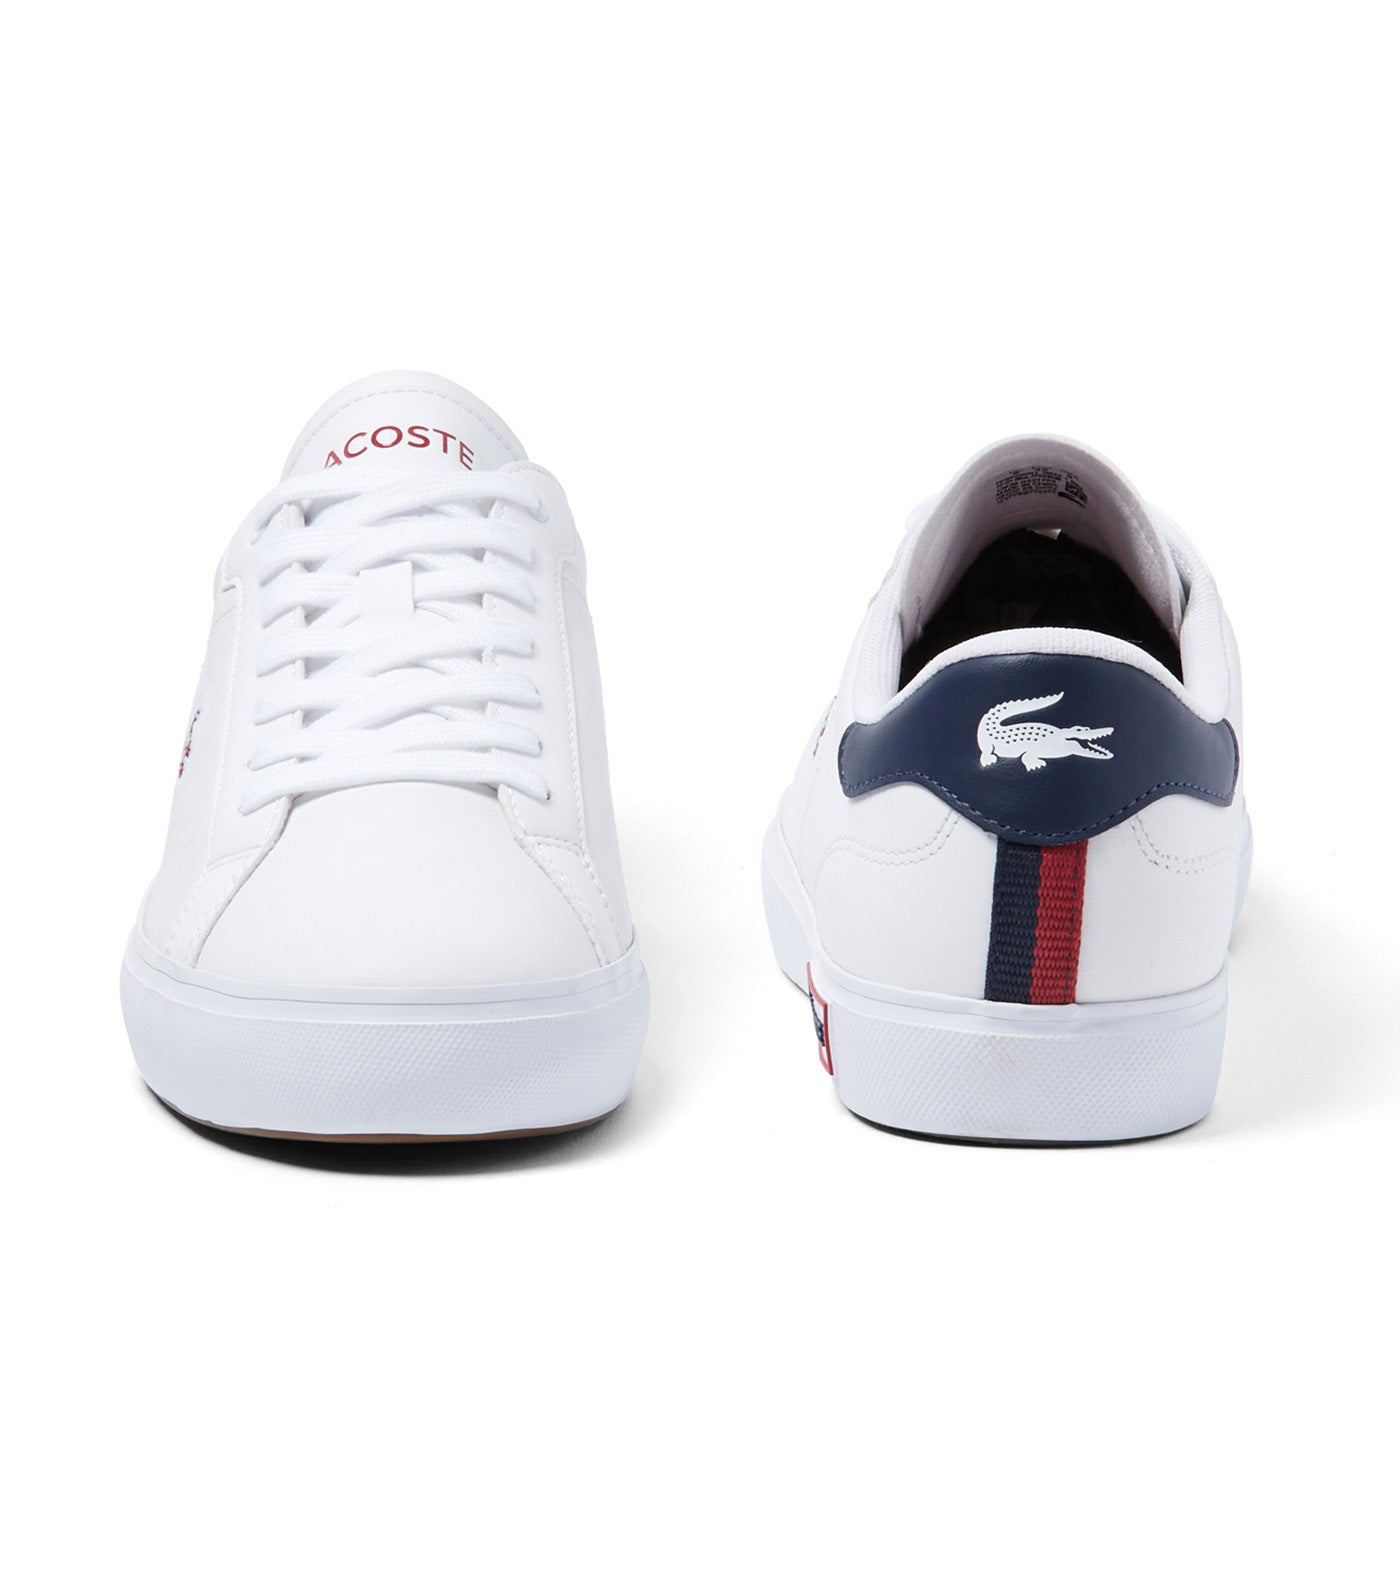 Men's Powercourt Leather Tricolour Trainers White/Navy/Red